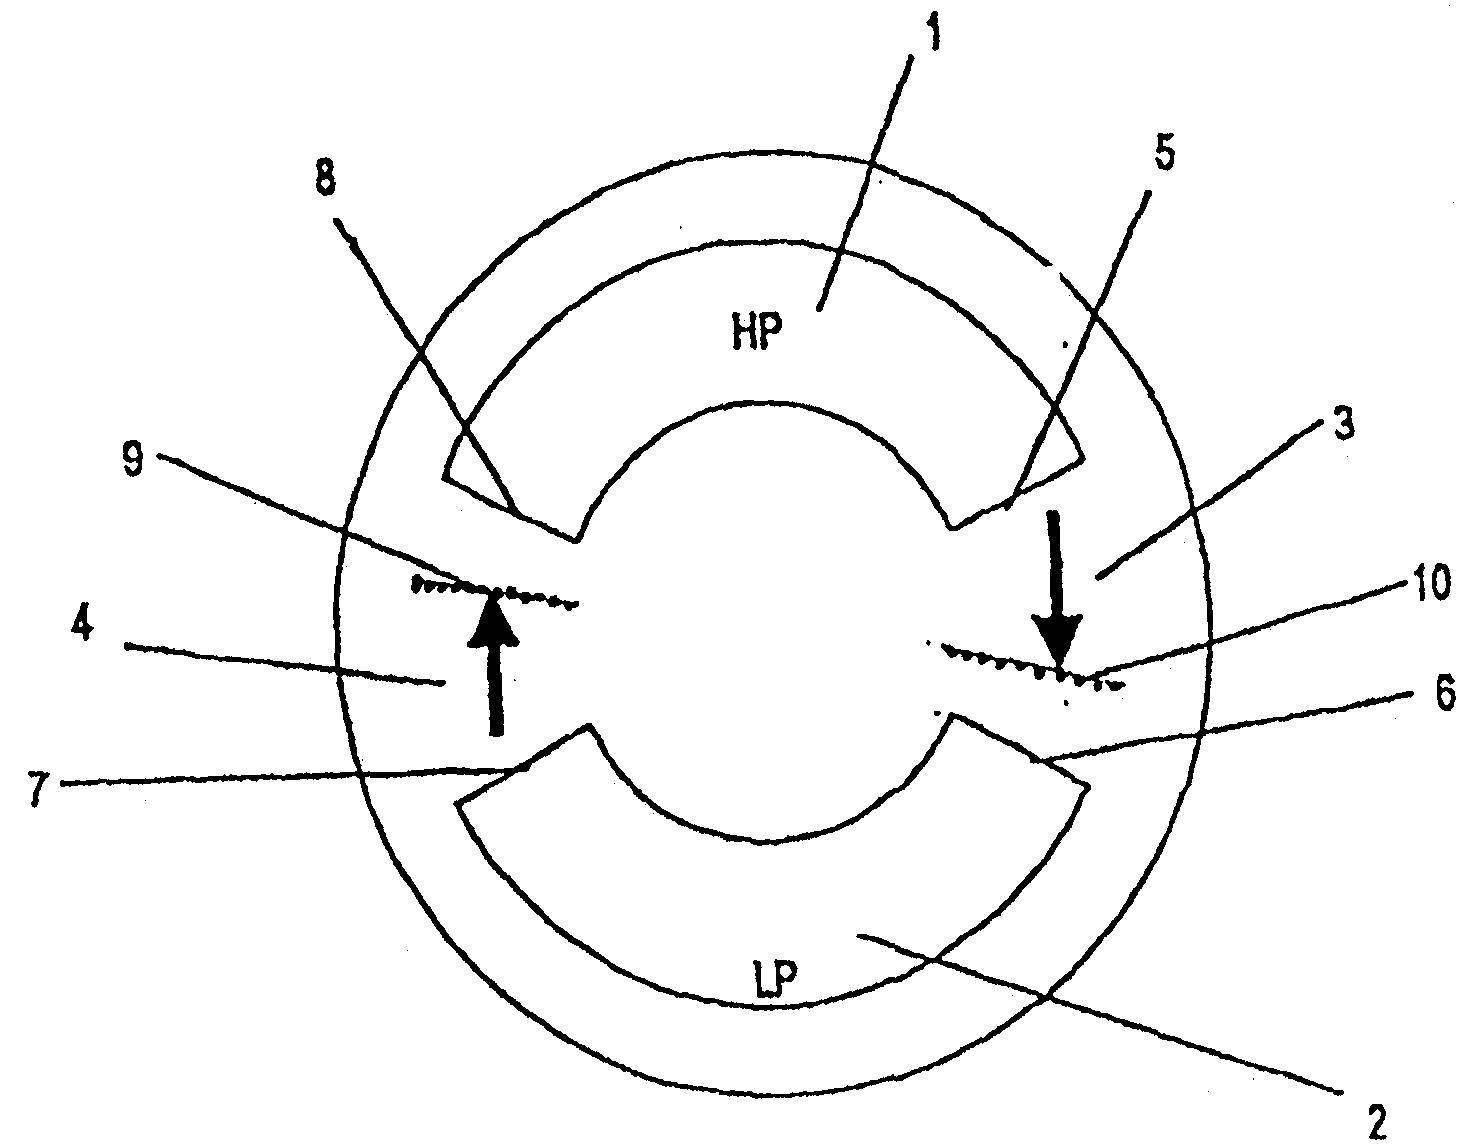 Method for reducing noise and cavitation in machines and pressure exchangers which pressurize or depressurize fluids by means of displacement principle